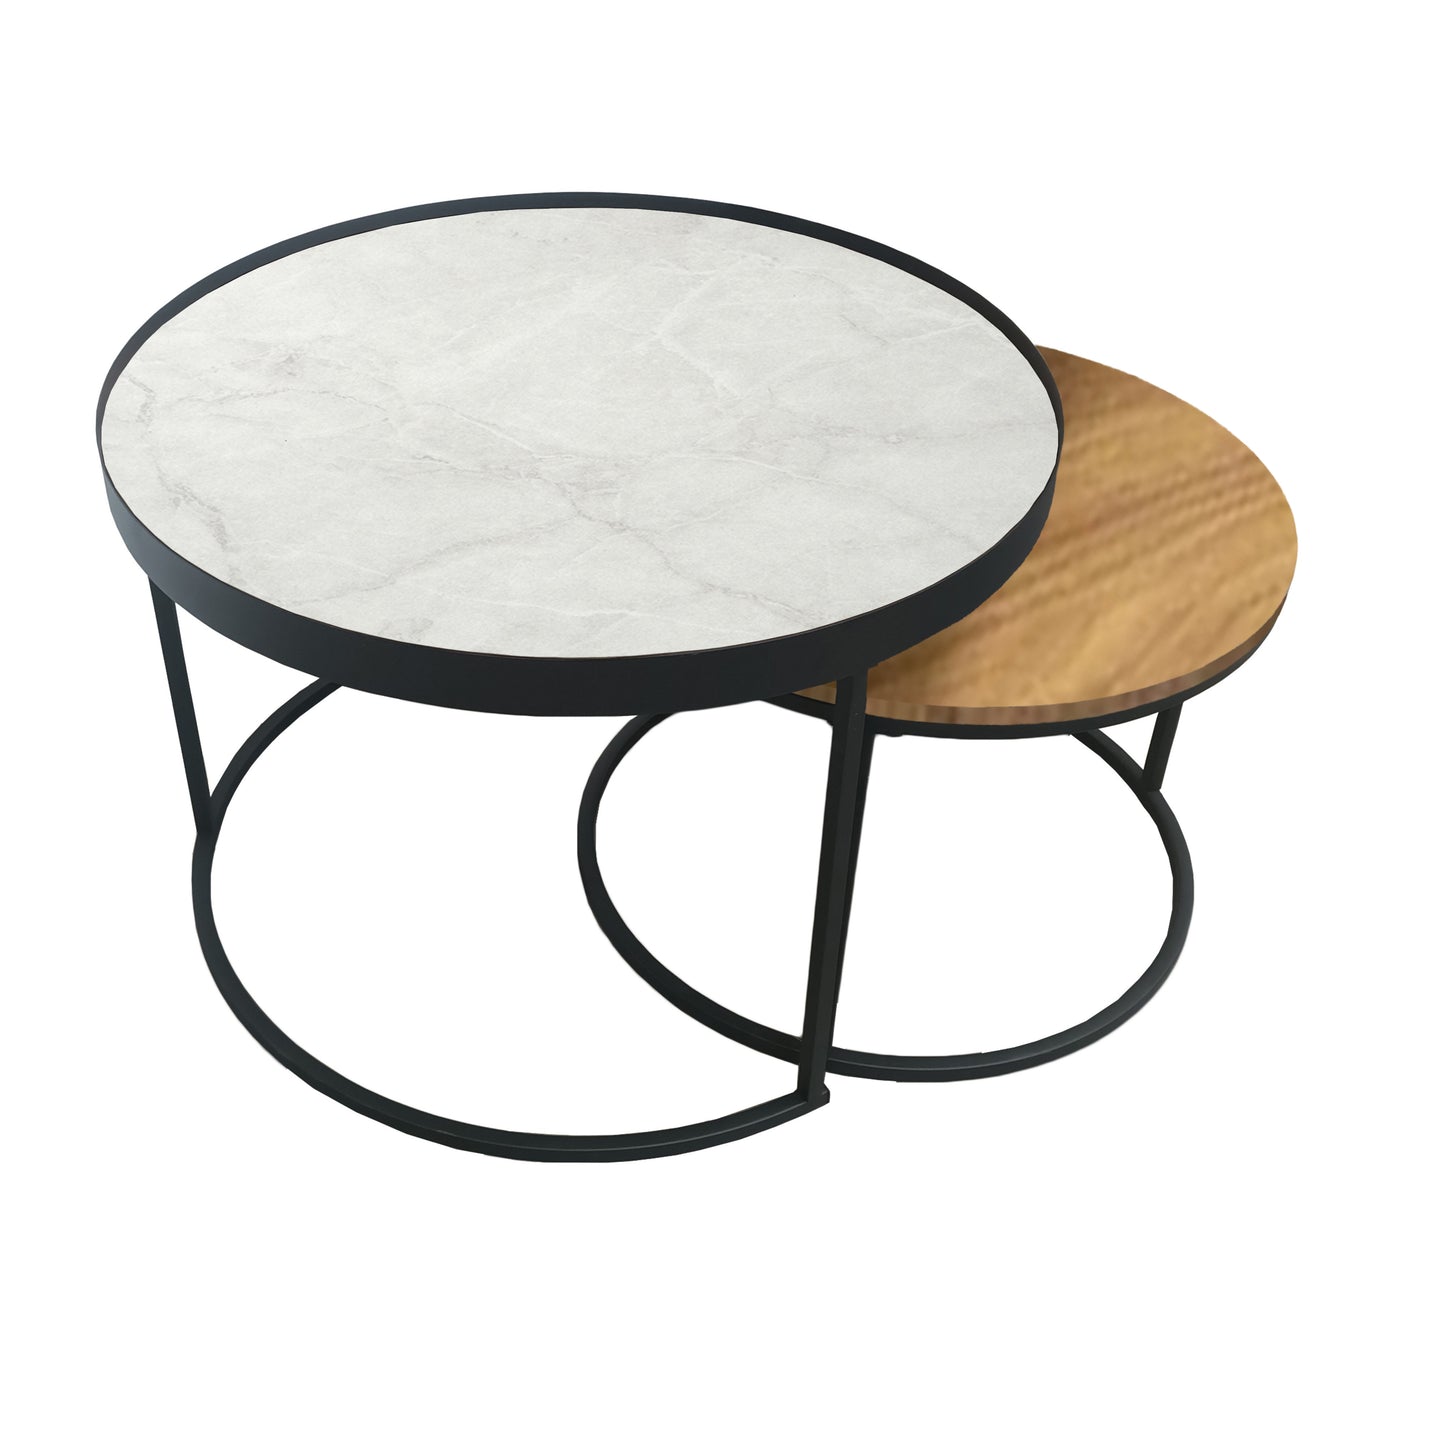 Criterion Nested Set Coffee Tables 760mm Black Metal Frame Large White Marble Look, Small English Oak